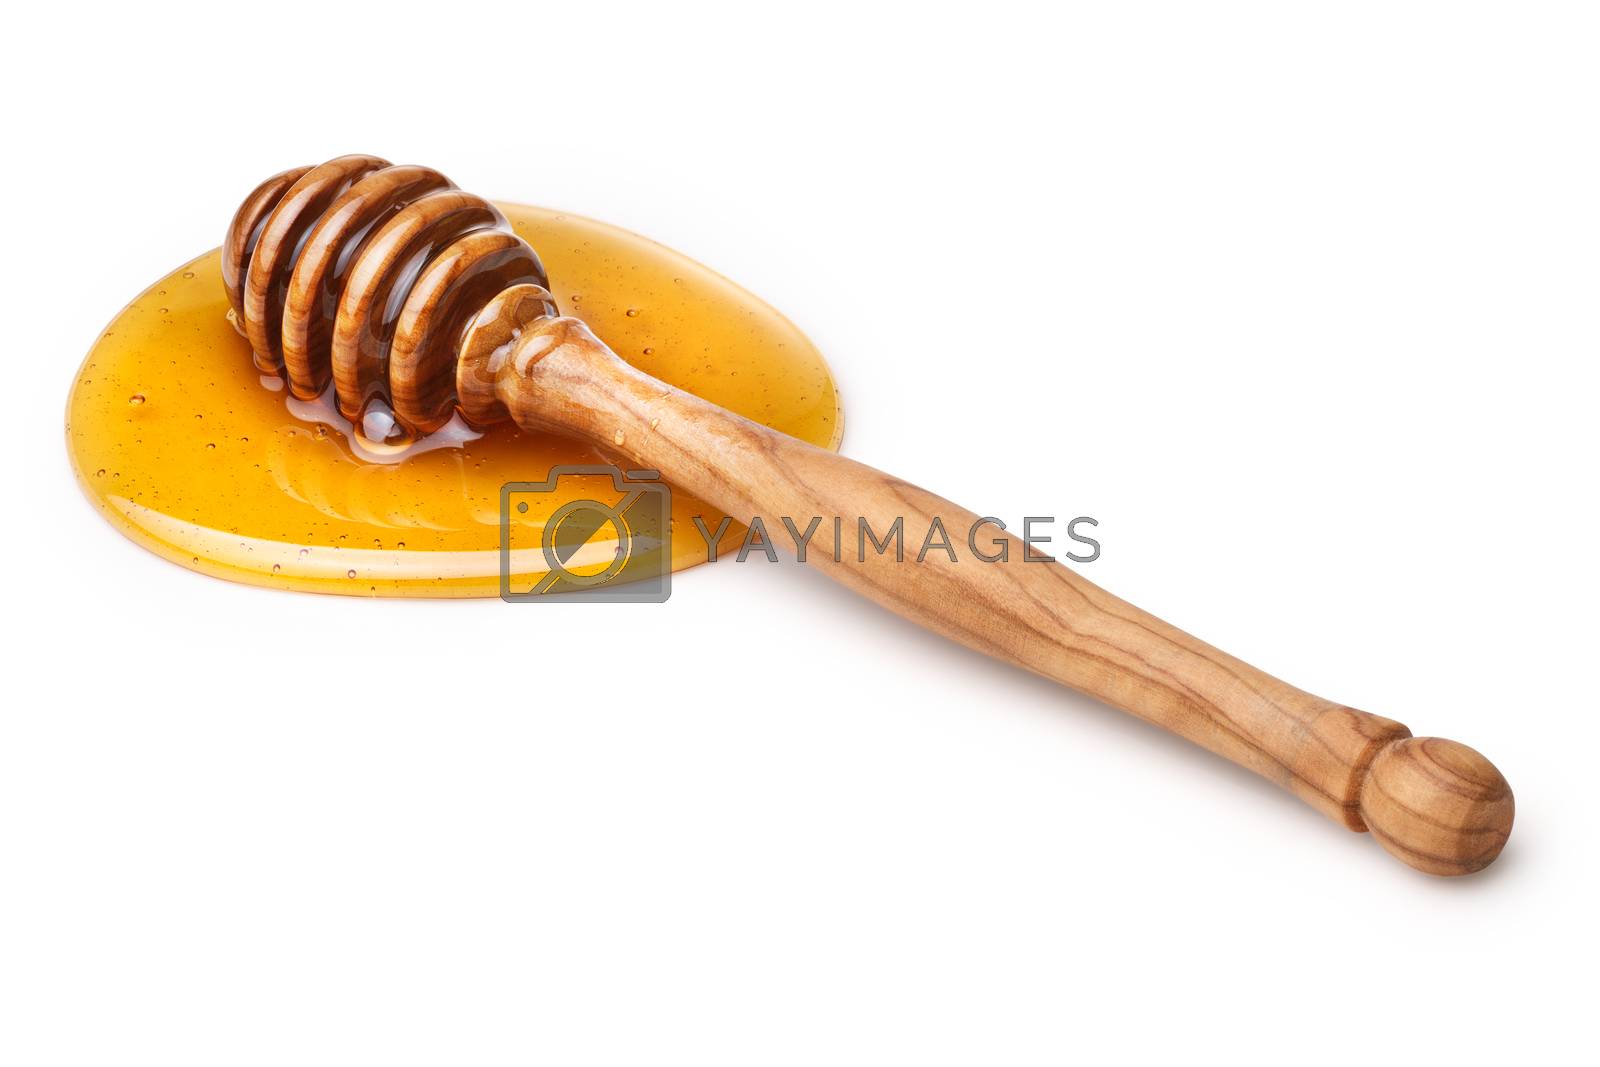 Royalty free image of Wooden honey dipper by maxsol